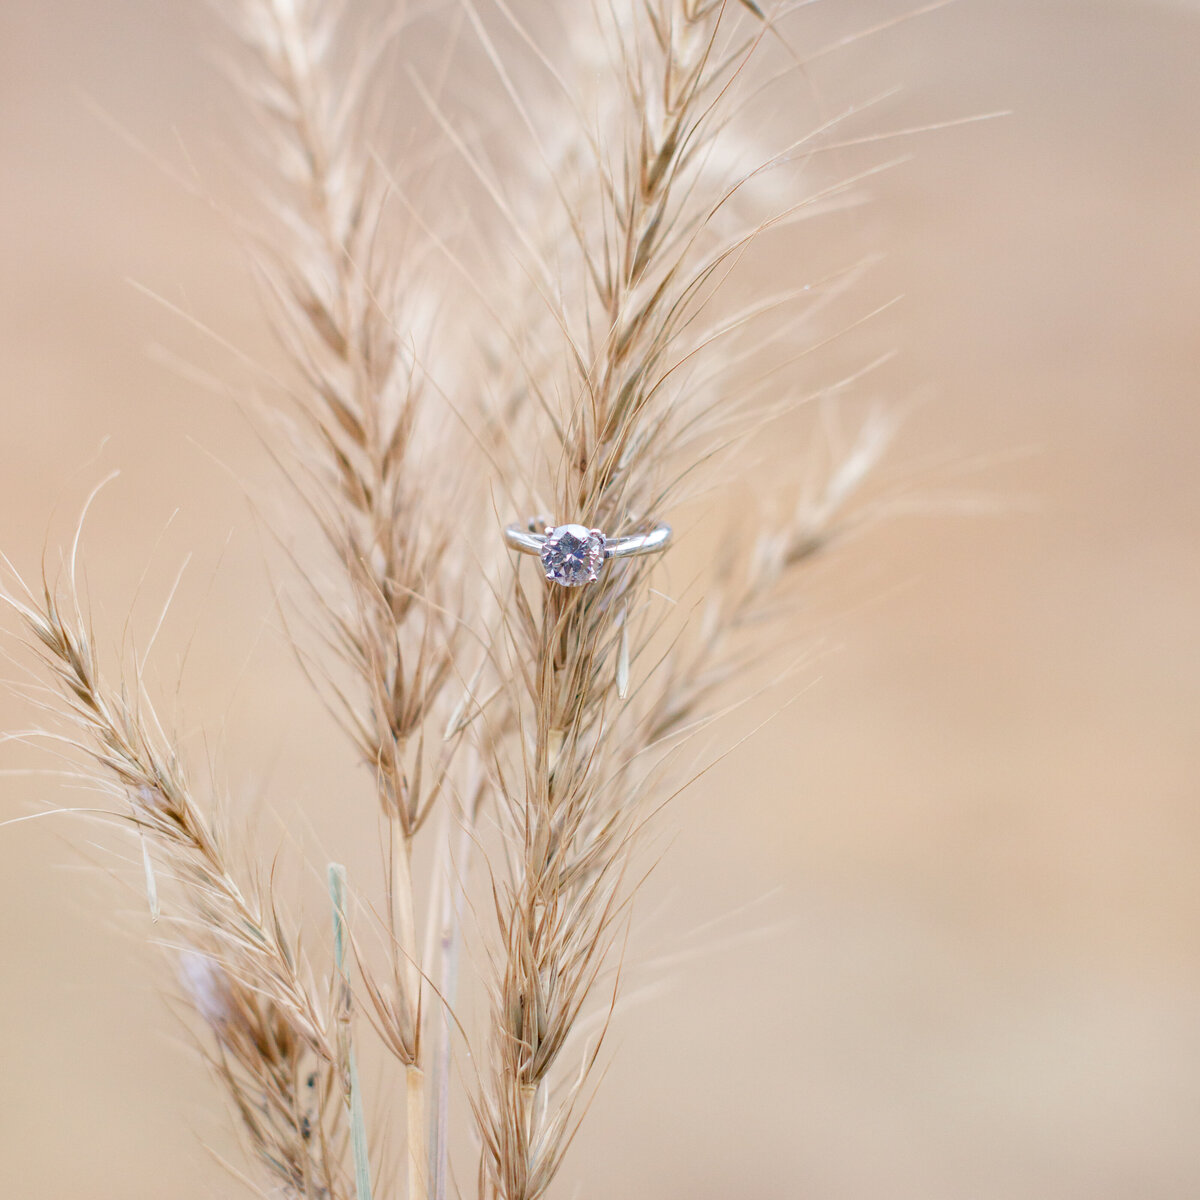 wedding ring detail resting on wheat grass  by Firefly Photography